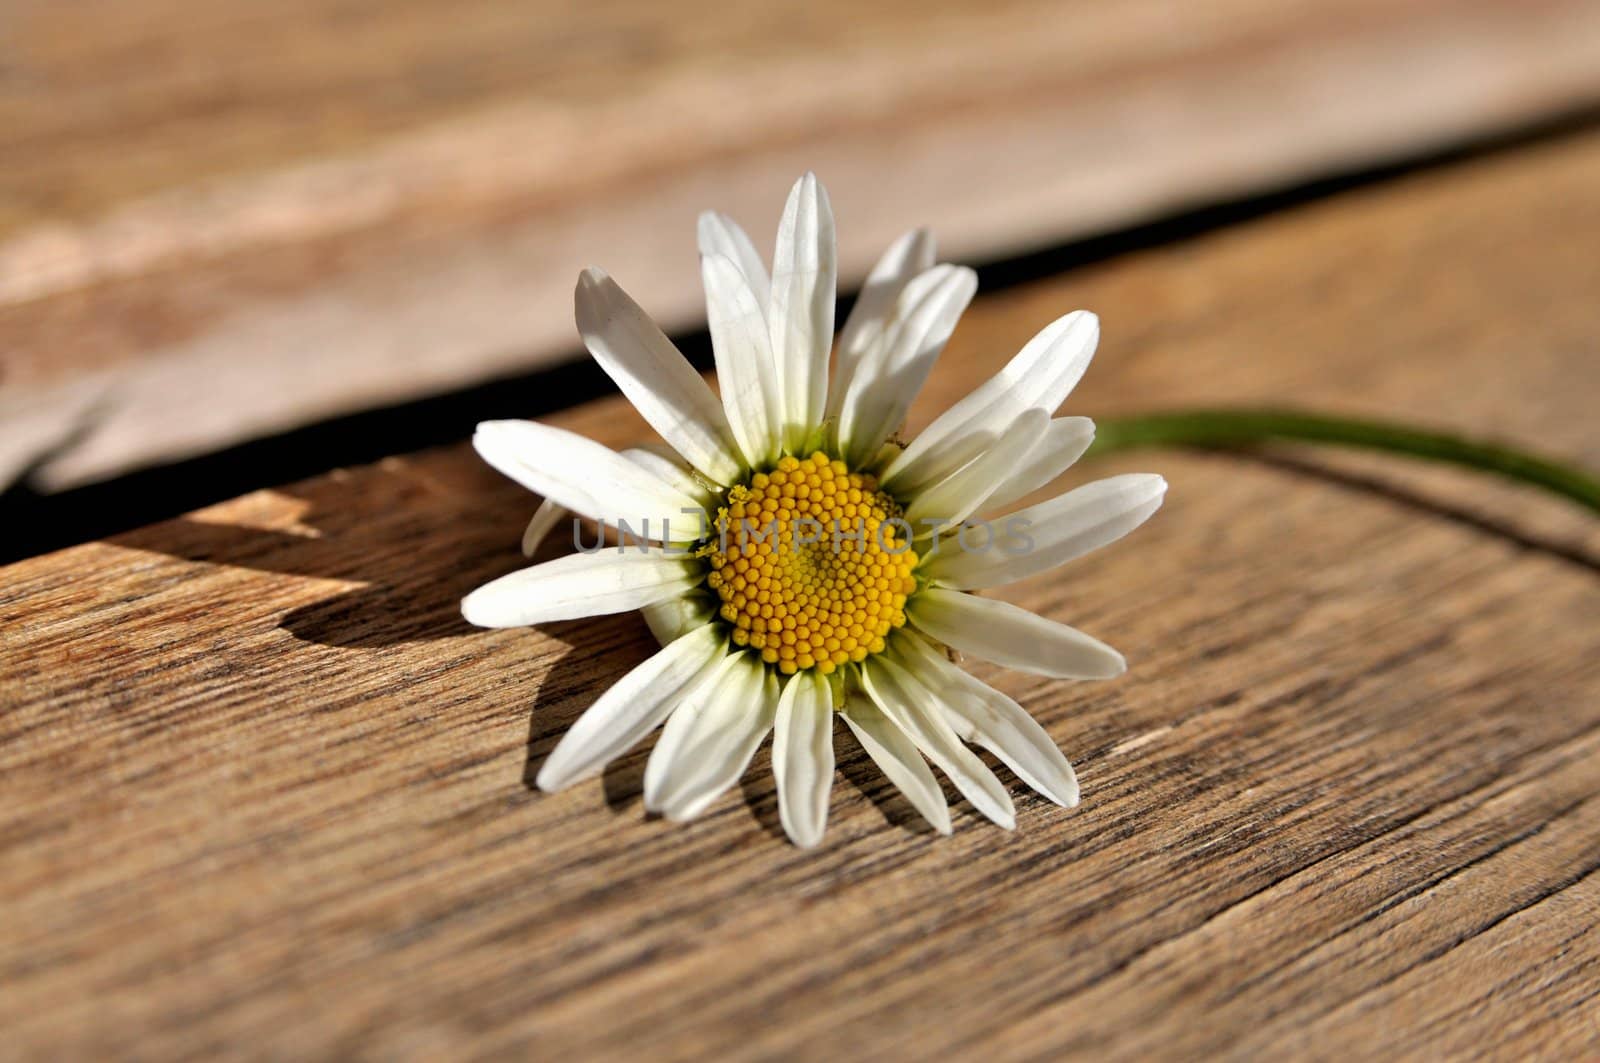 A marguerite on a wooden bench